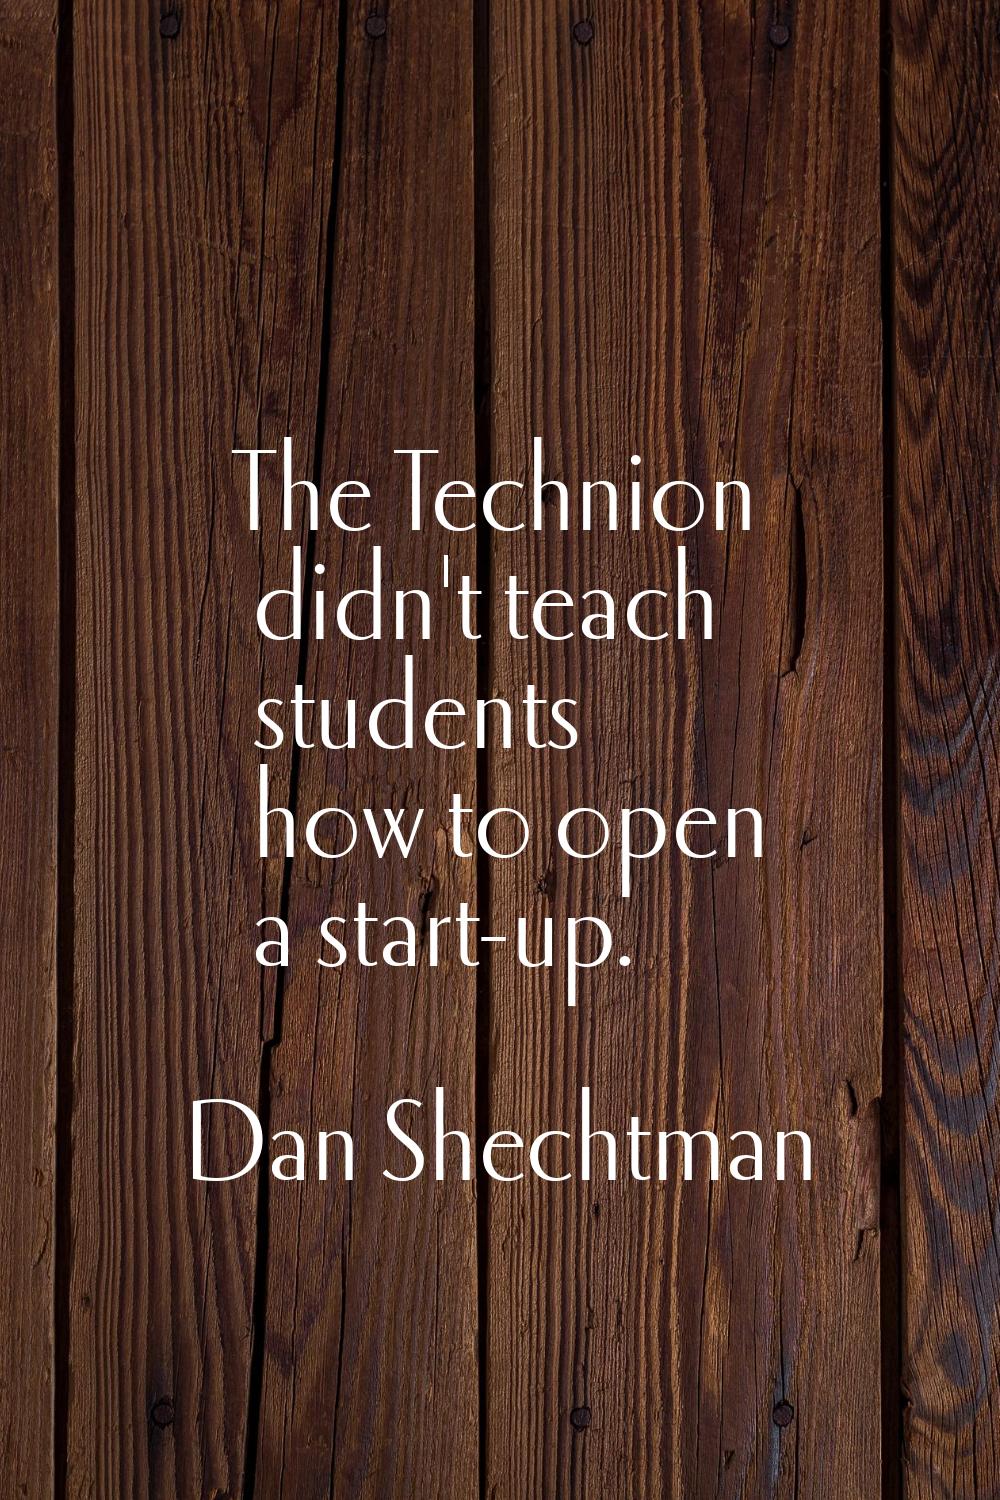 The Technion didn't teach students how to open a start-up.